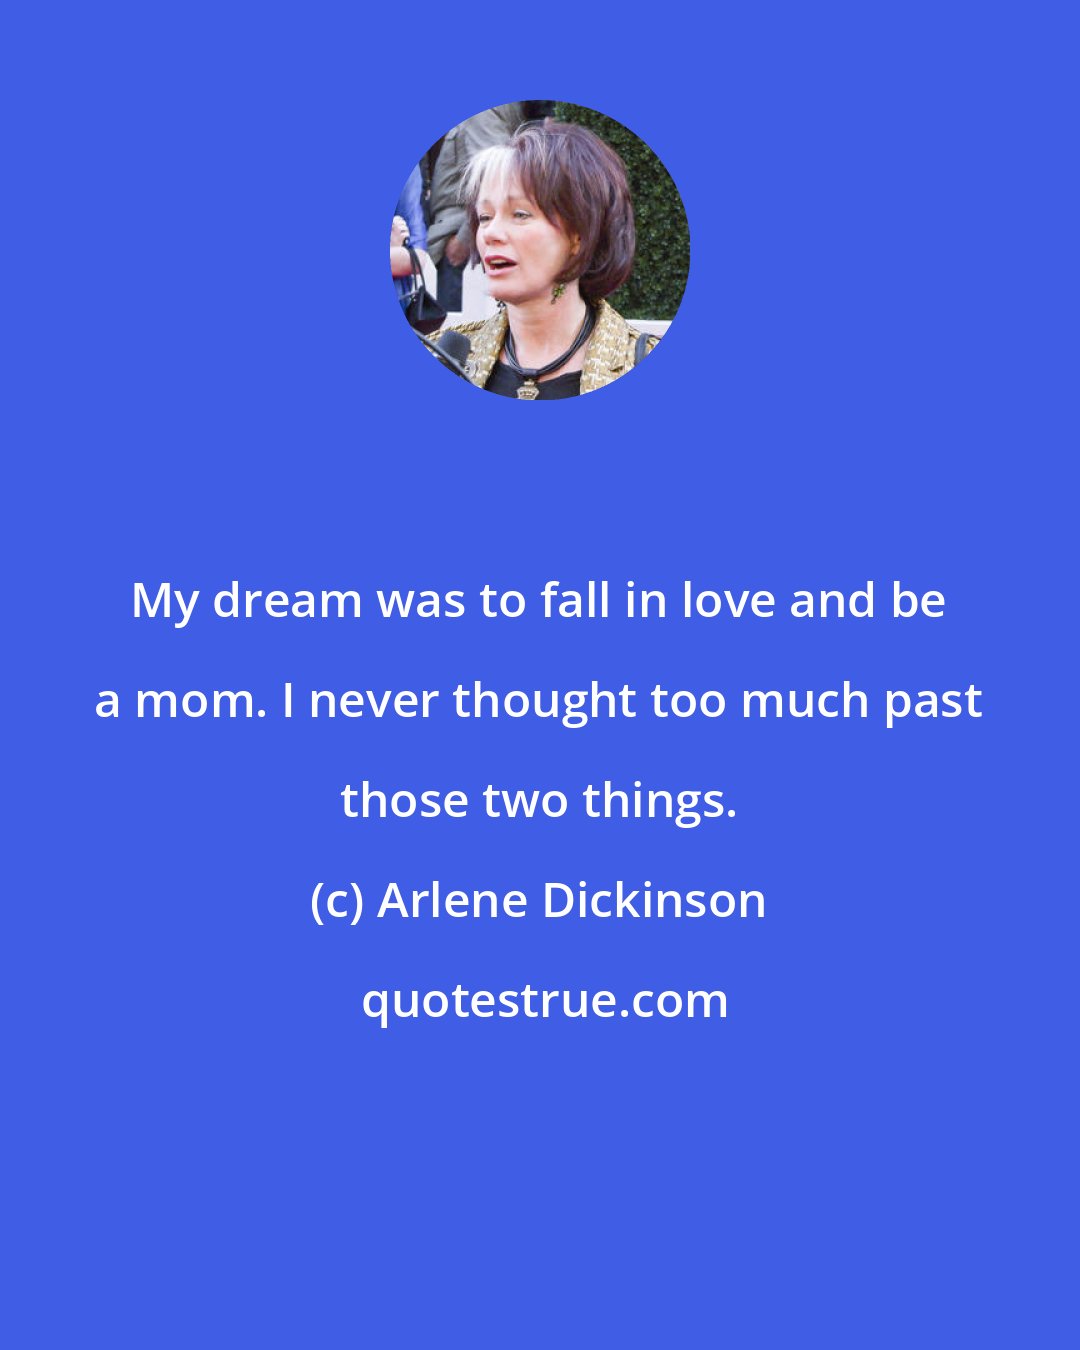 Arlene Dickinson: My dream was to fall in love and be a mom. I never thought too much past those two things.